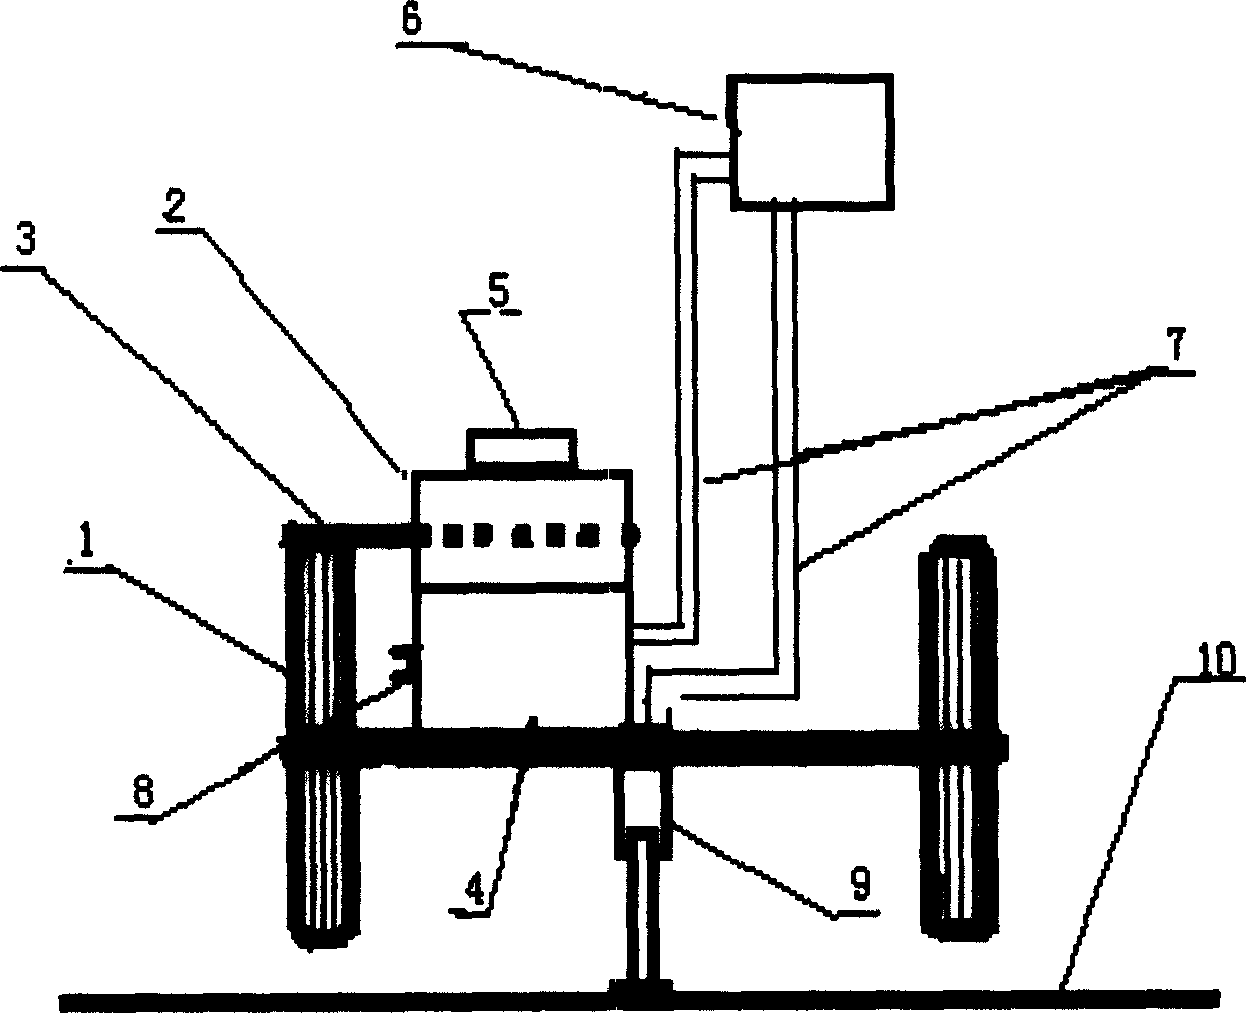 Portable integrated machine for generation, accumulation and motor driven and it attached device